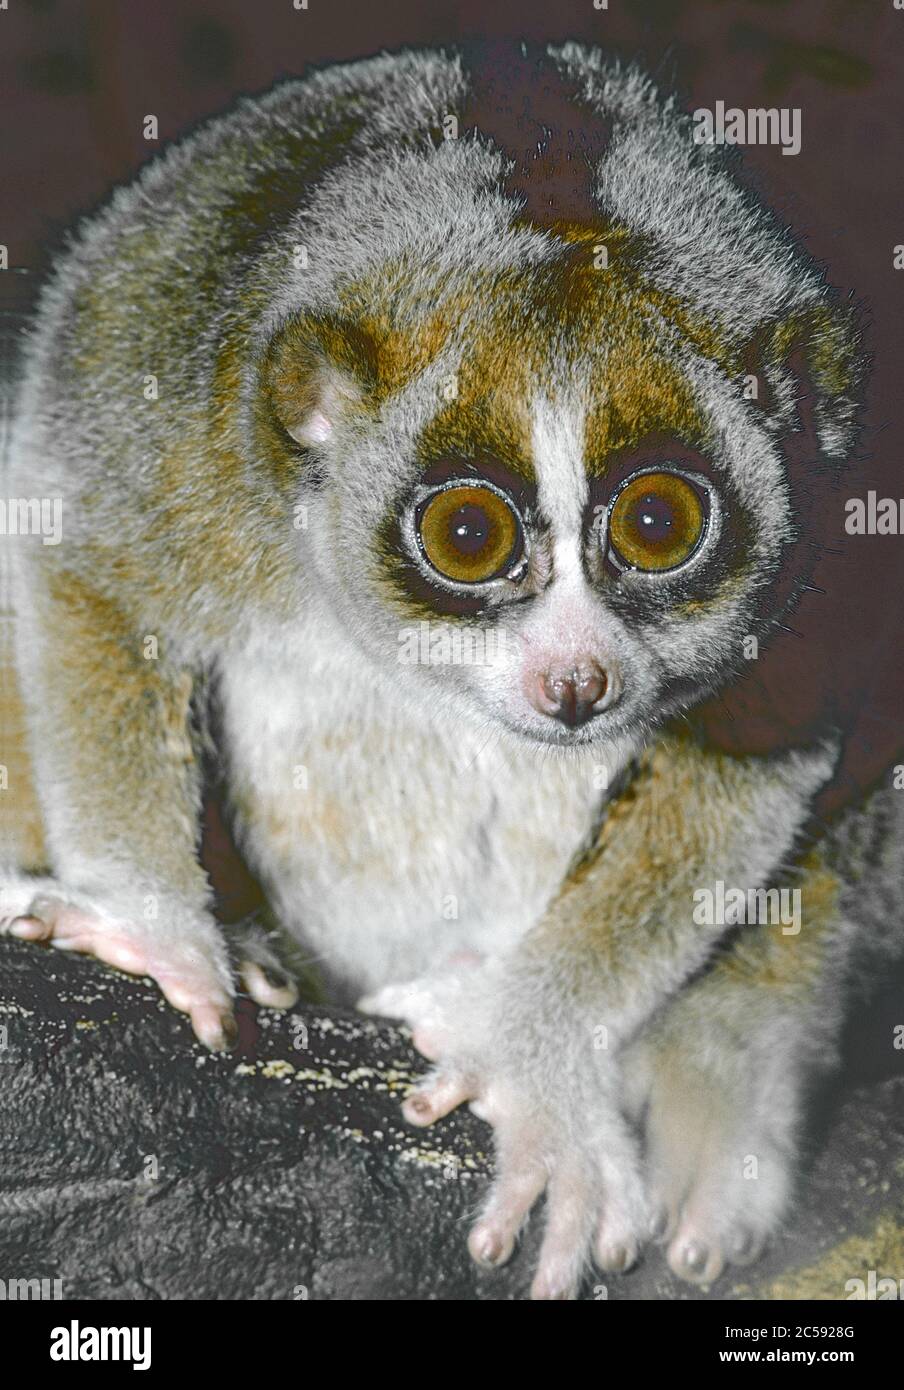 A nocturnal Slow Loris,  (Nycticebus coucang,) from South East Asia. Stock Photo